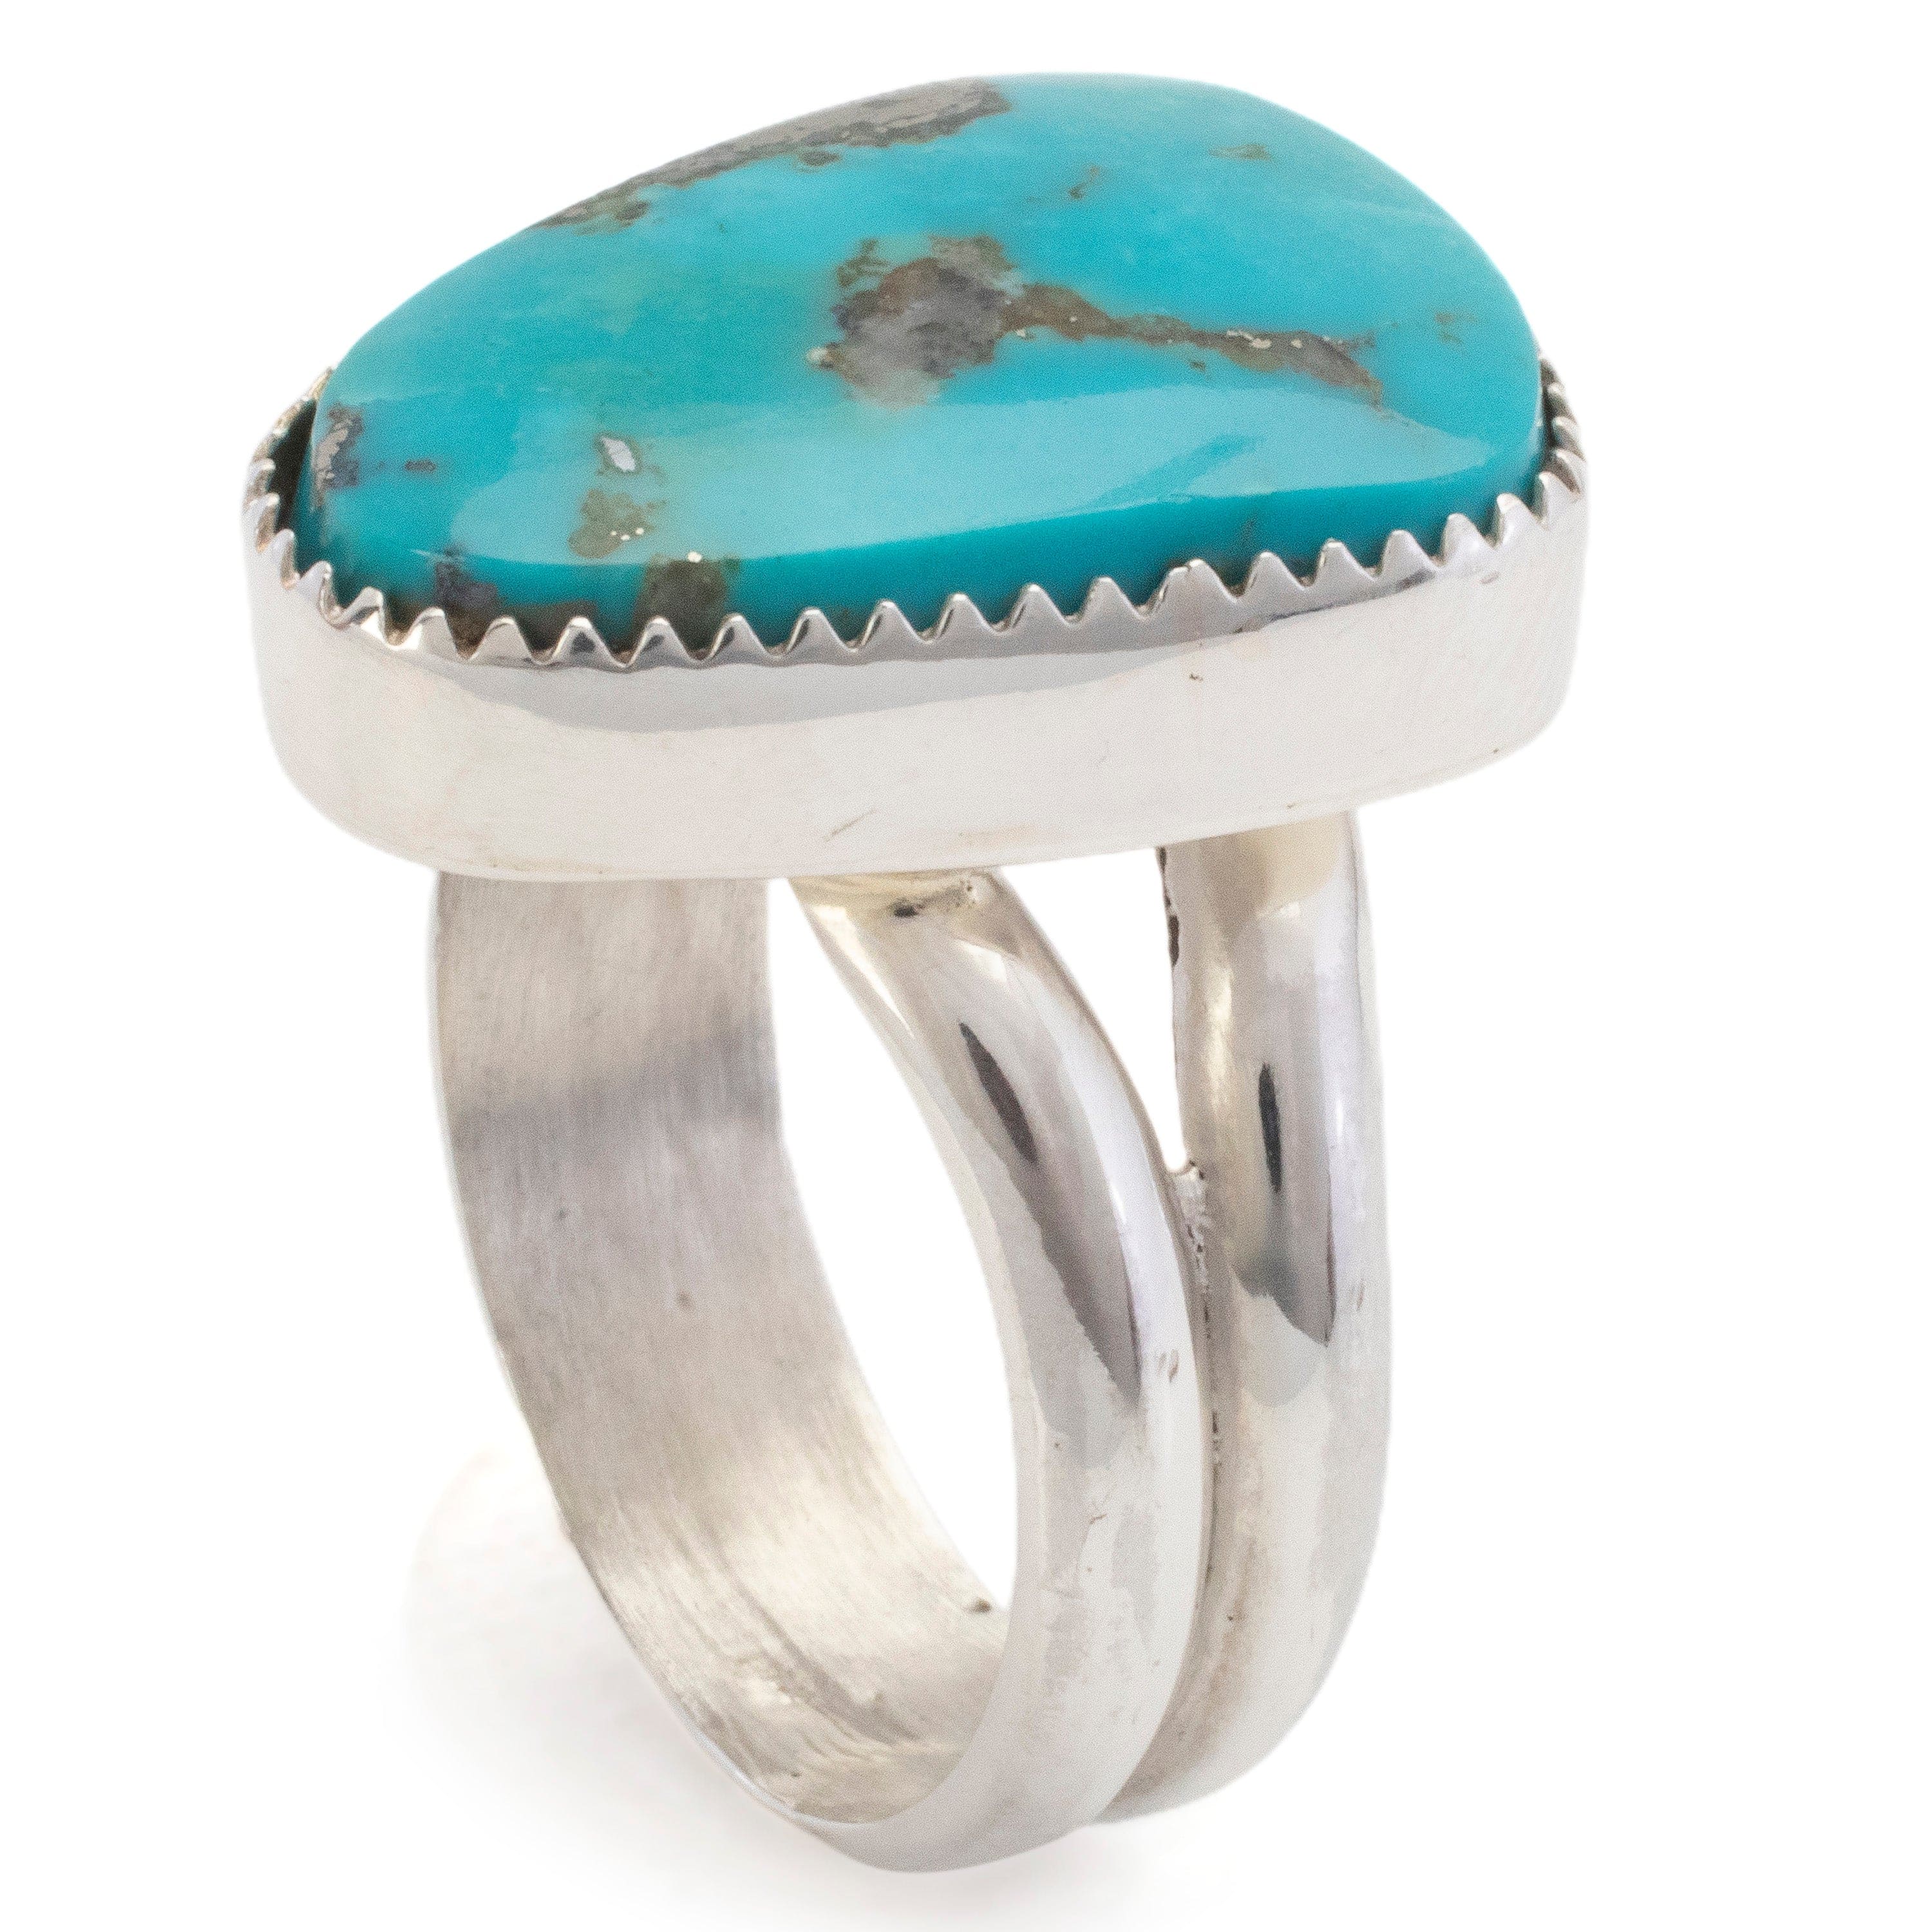 Kalifano Southwest Silver Jewelry 11 Kingman Turquoise USA Handmade 925 Sterling Silver Ring NMR450.002.11